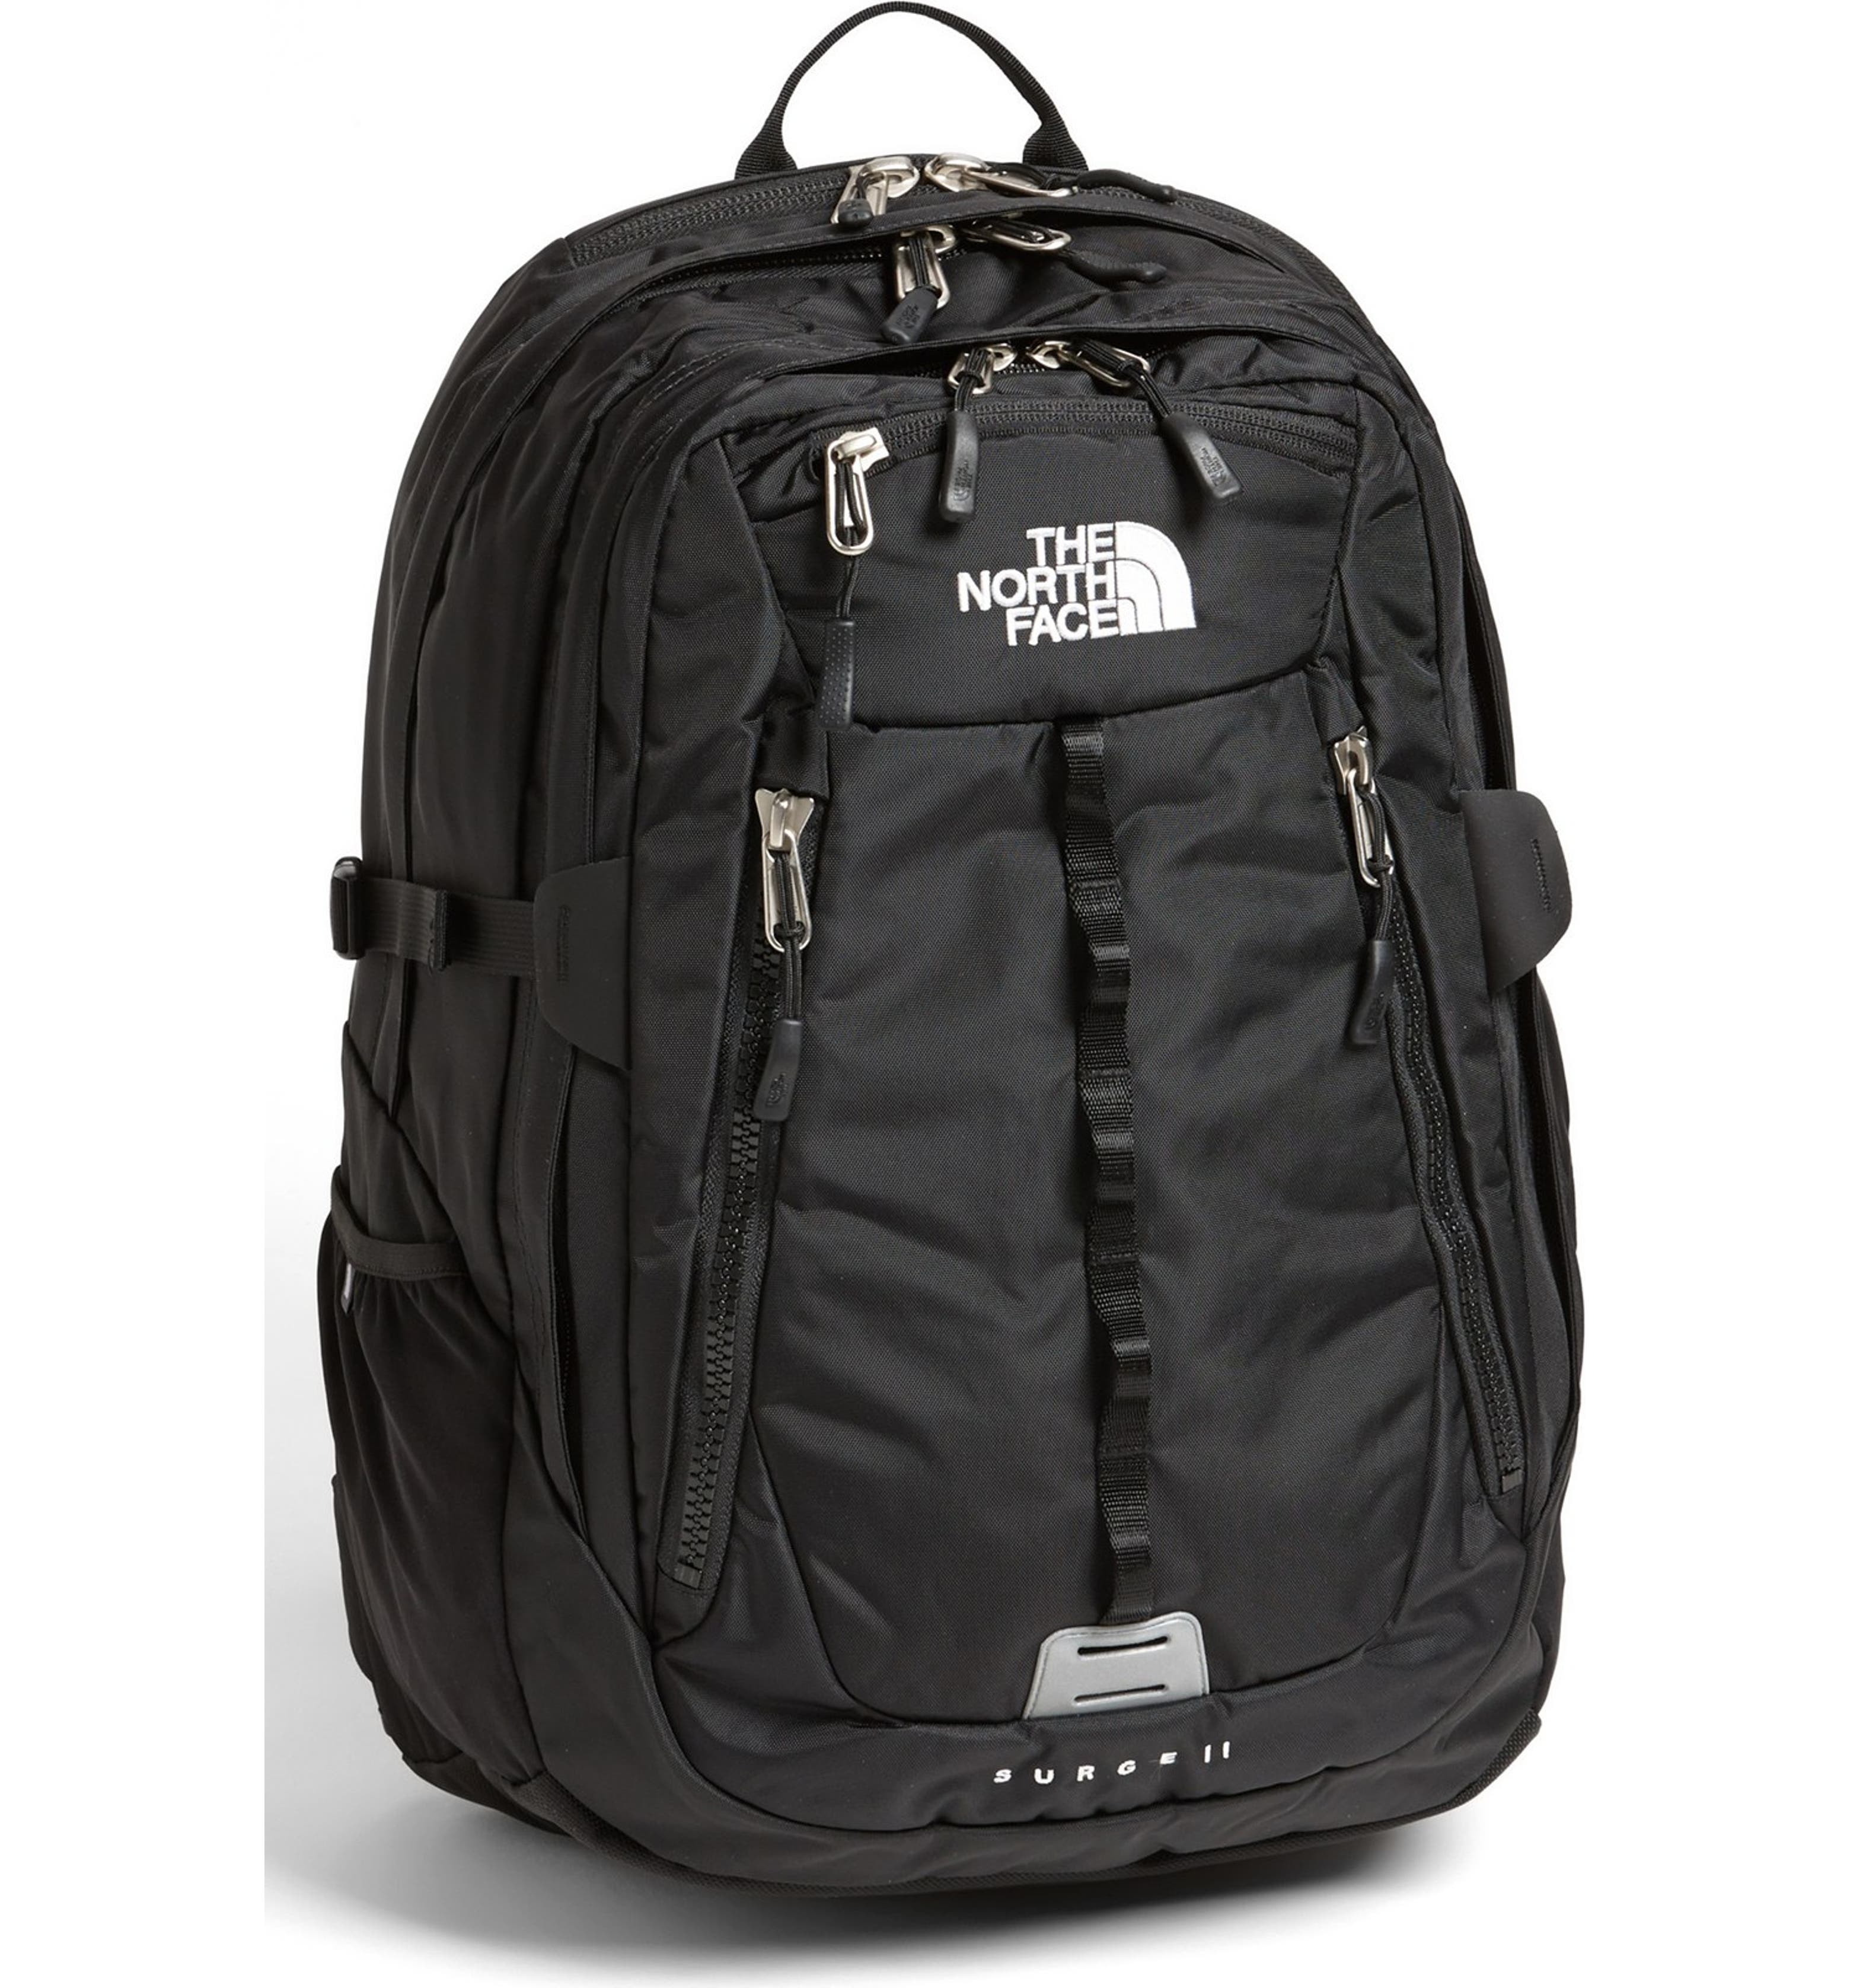 The North Face 'Surge II' Backpack | Nordstrom